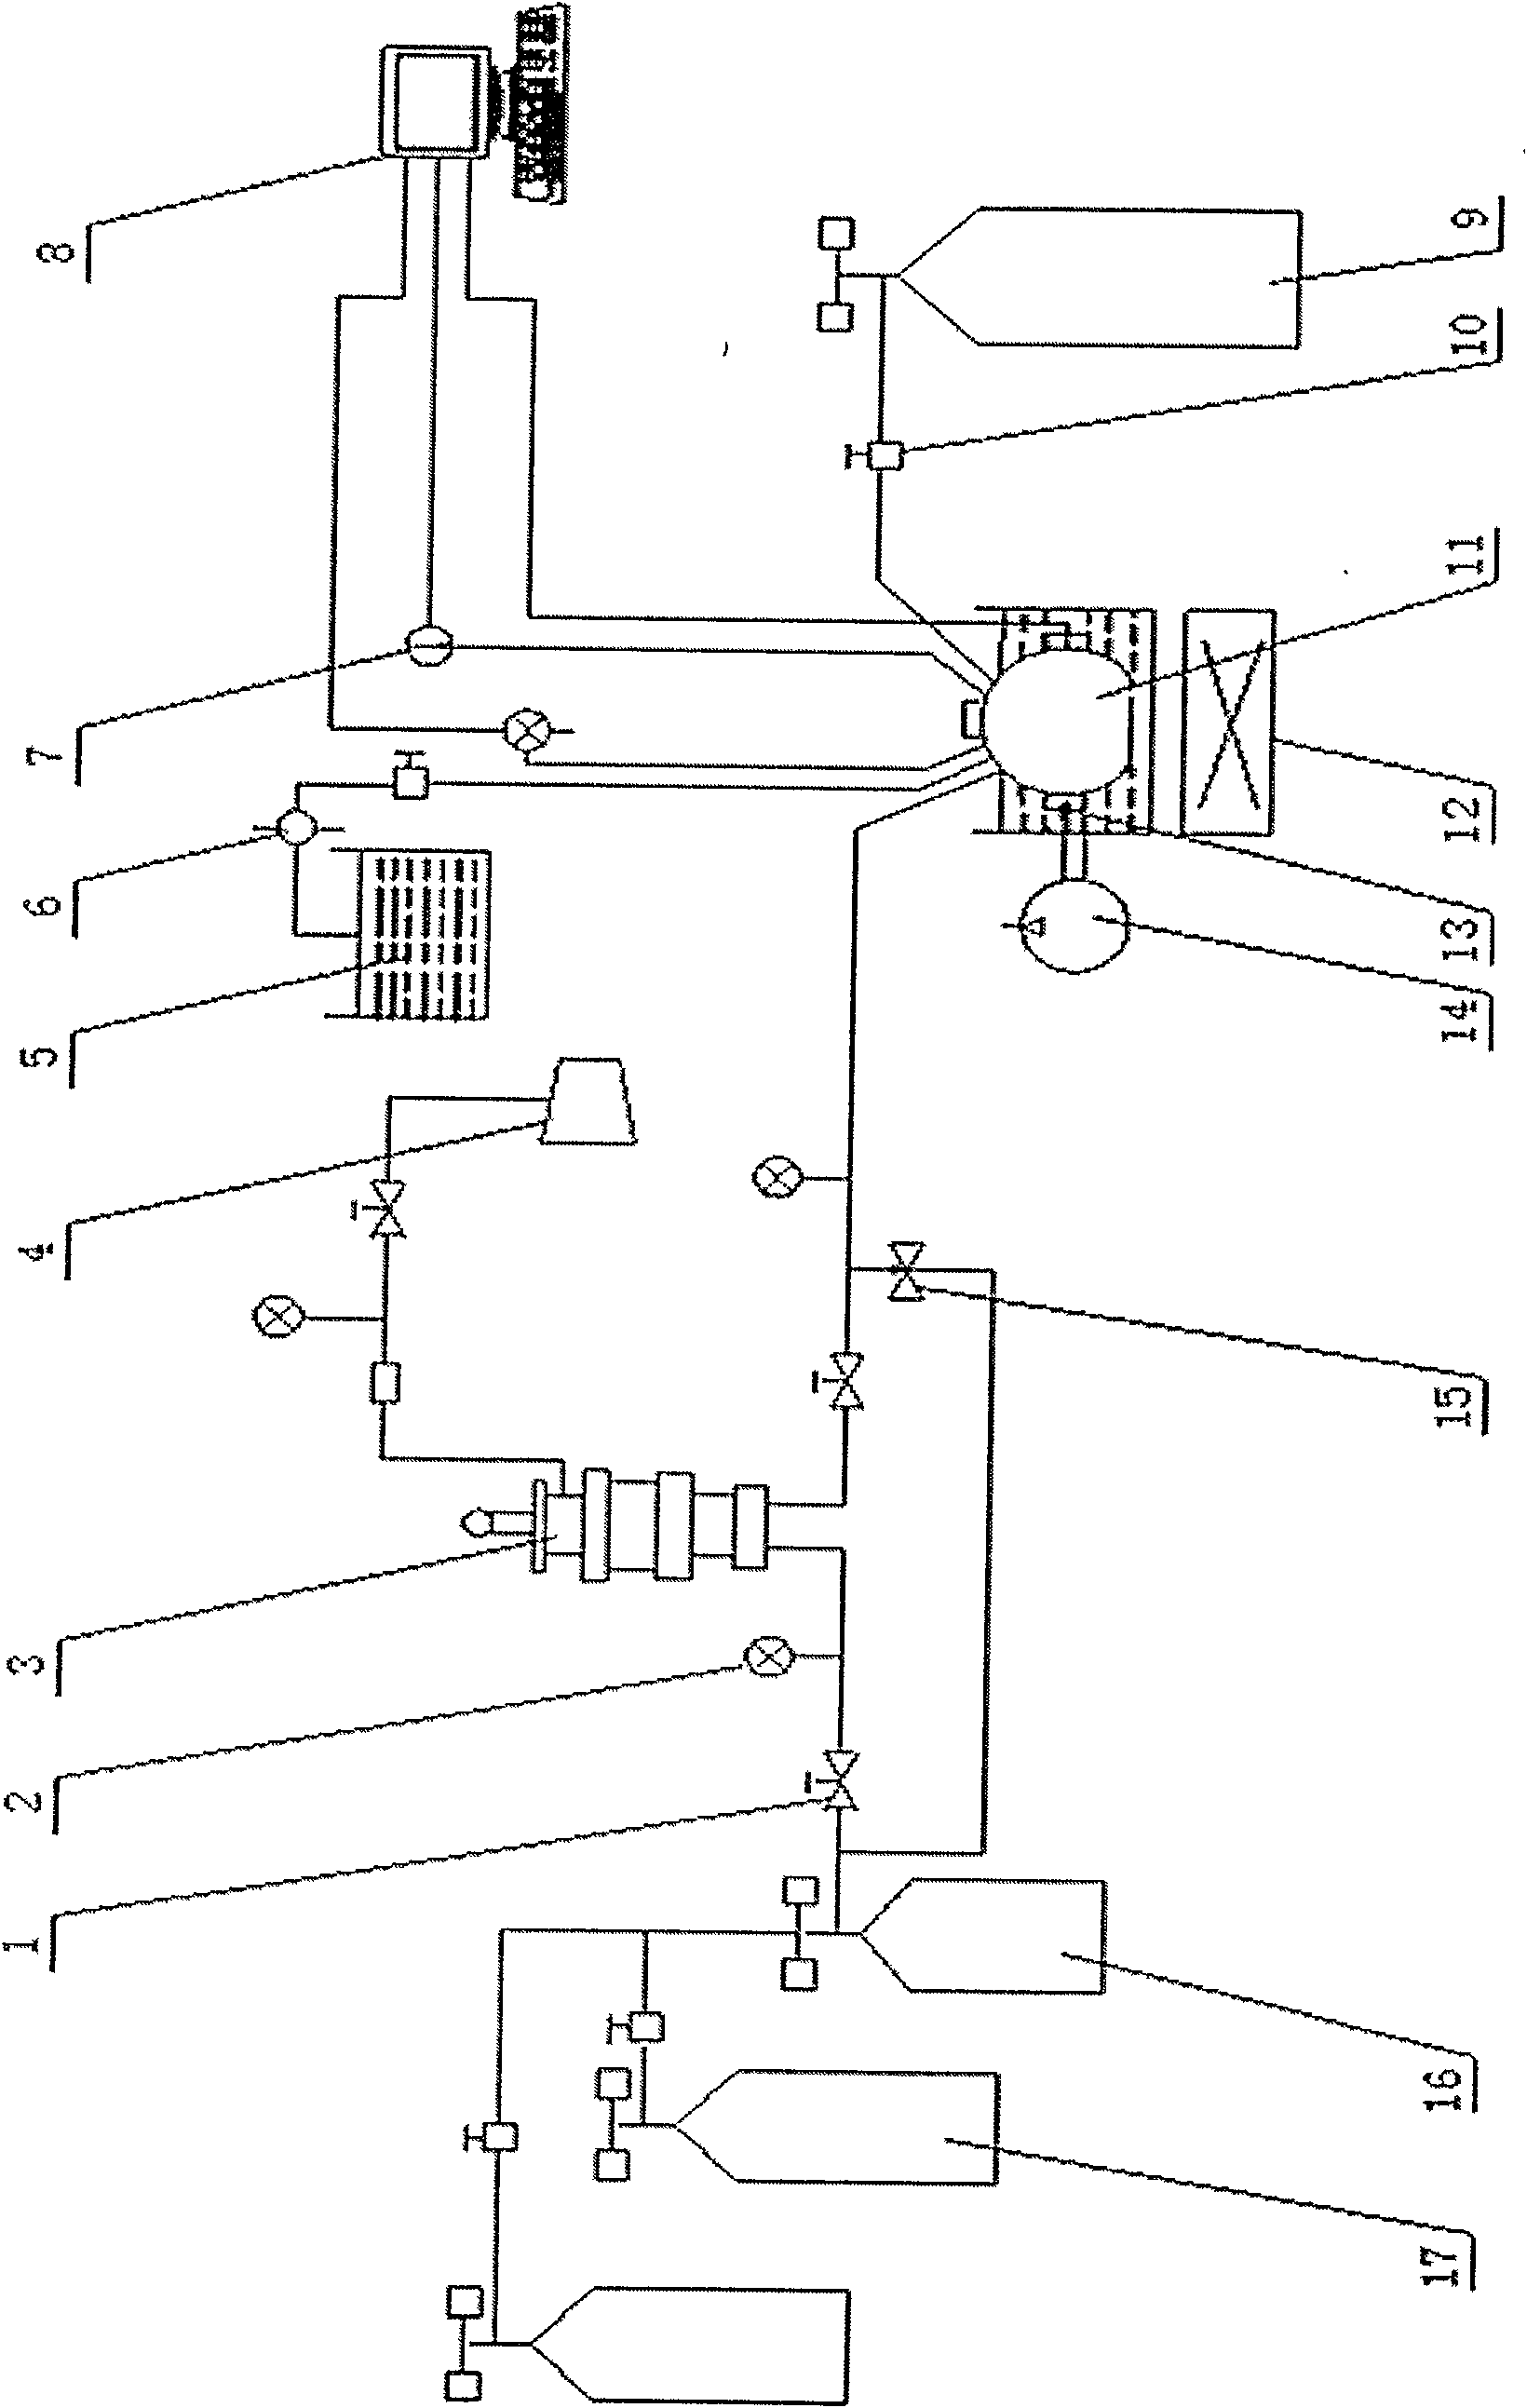 Complete equipment system for gas hydrate simulated composition and decomposition and reaction kettle